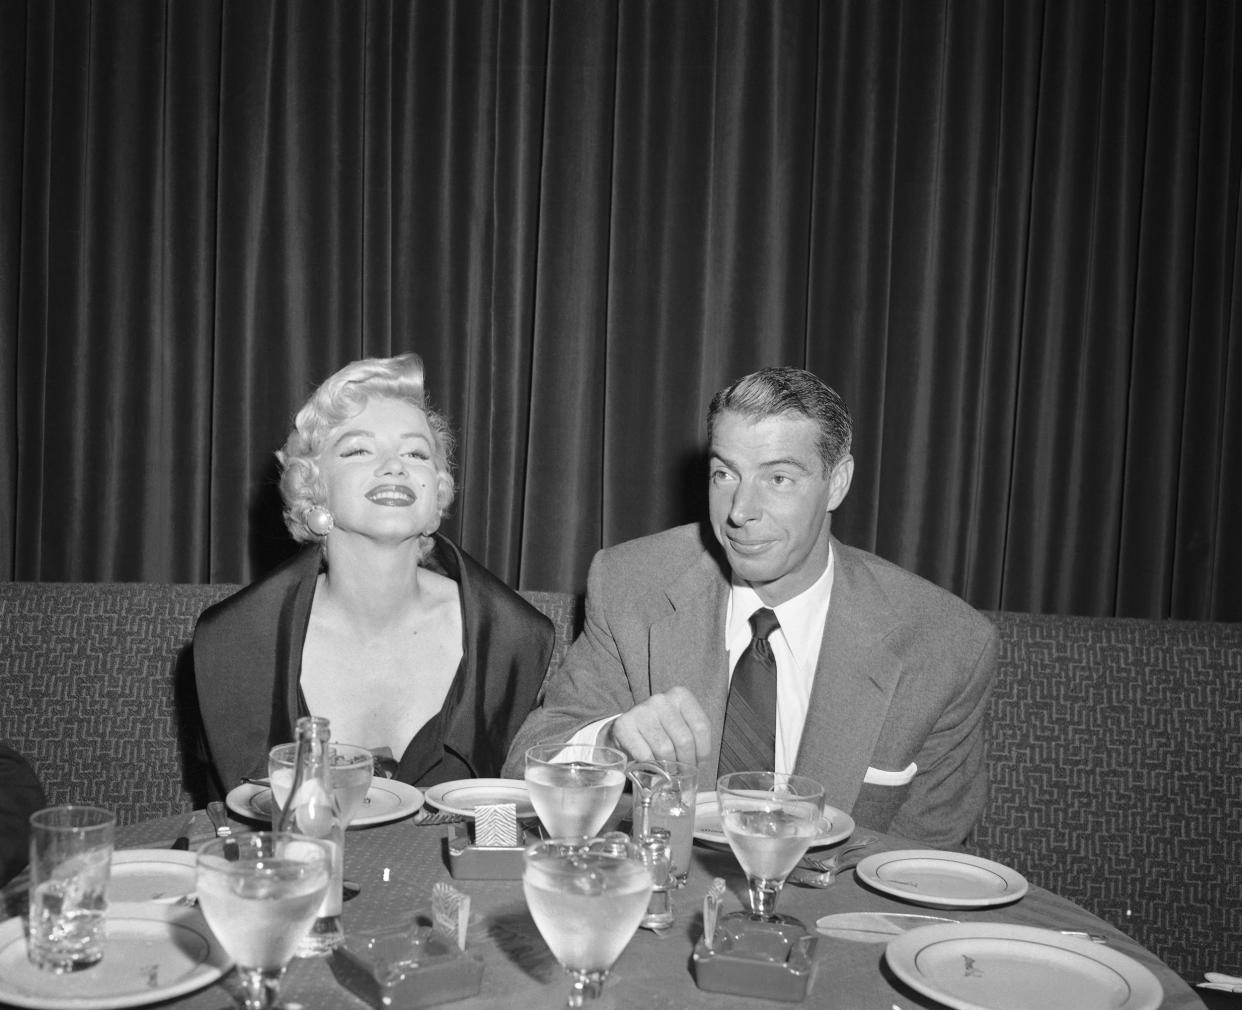 Marilyn Monroe and Joe DiMaggio Dining (Bettmann Archive / Getty Images )